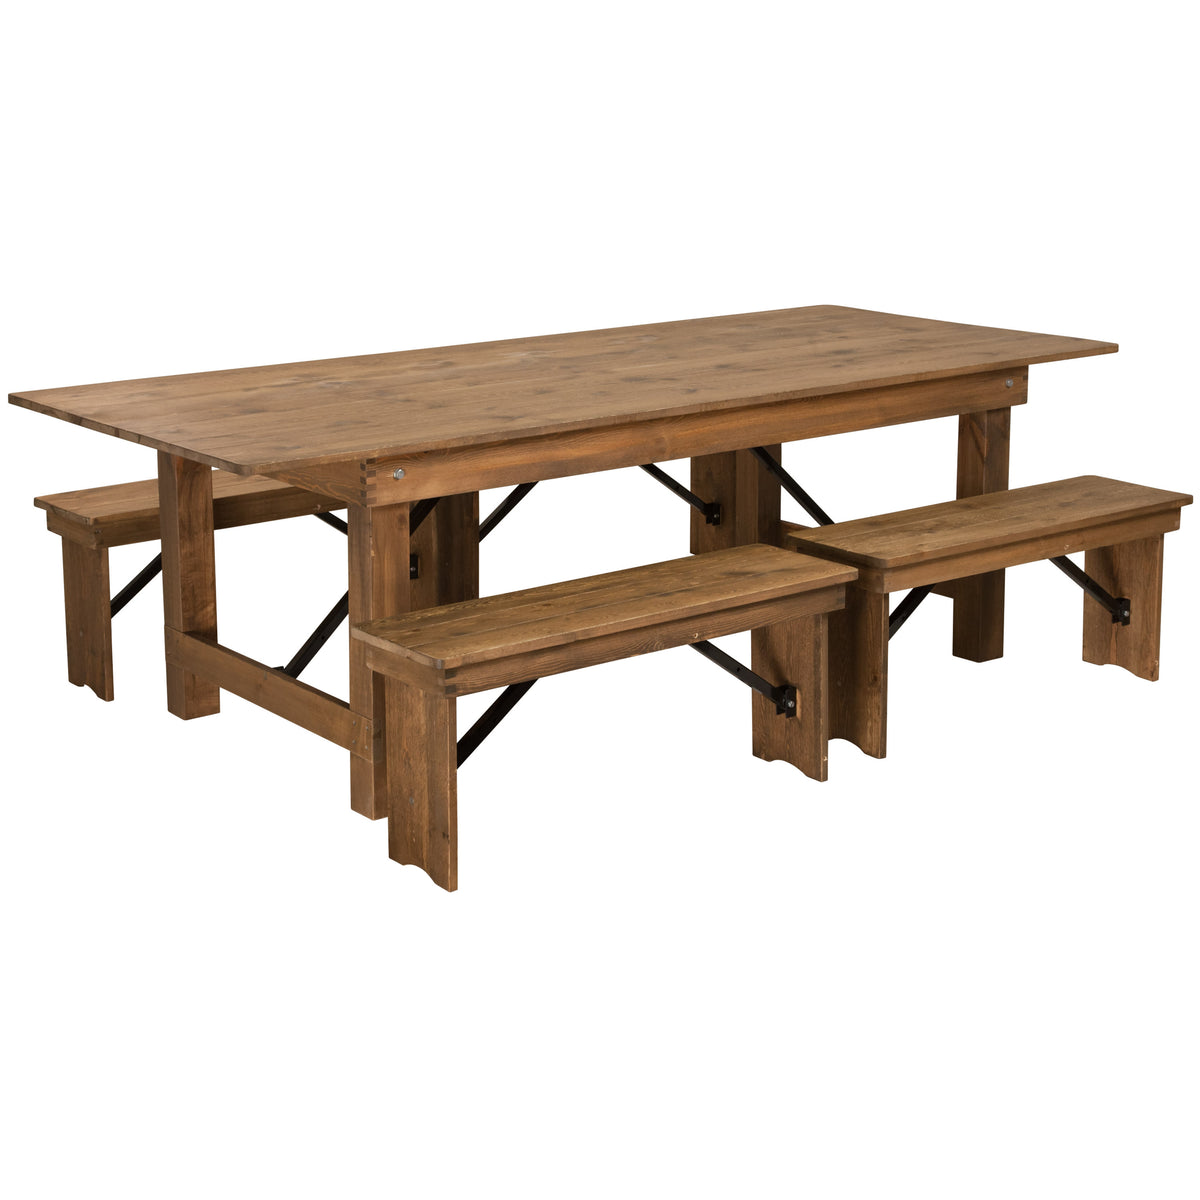 Antique Rustic |#| 8' x 40inch Antique Rustic Folding Farm Table and Four 40.25inchL Bench Set